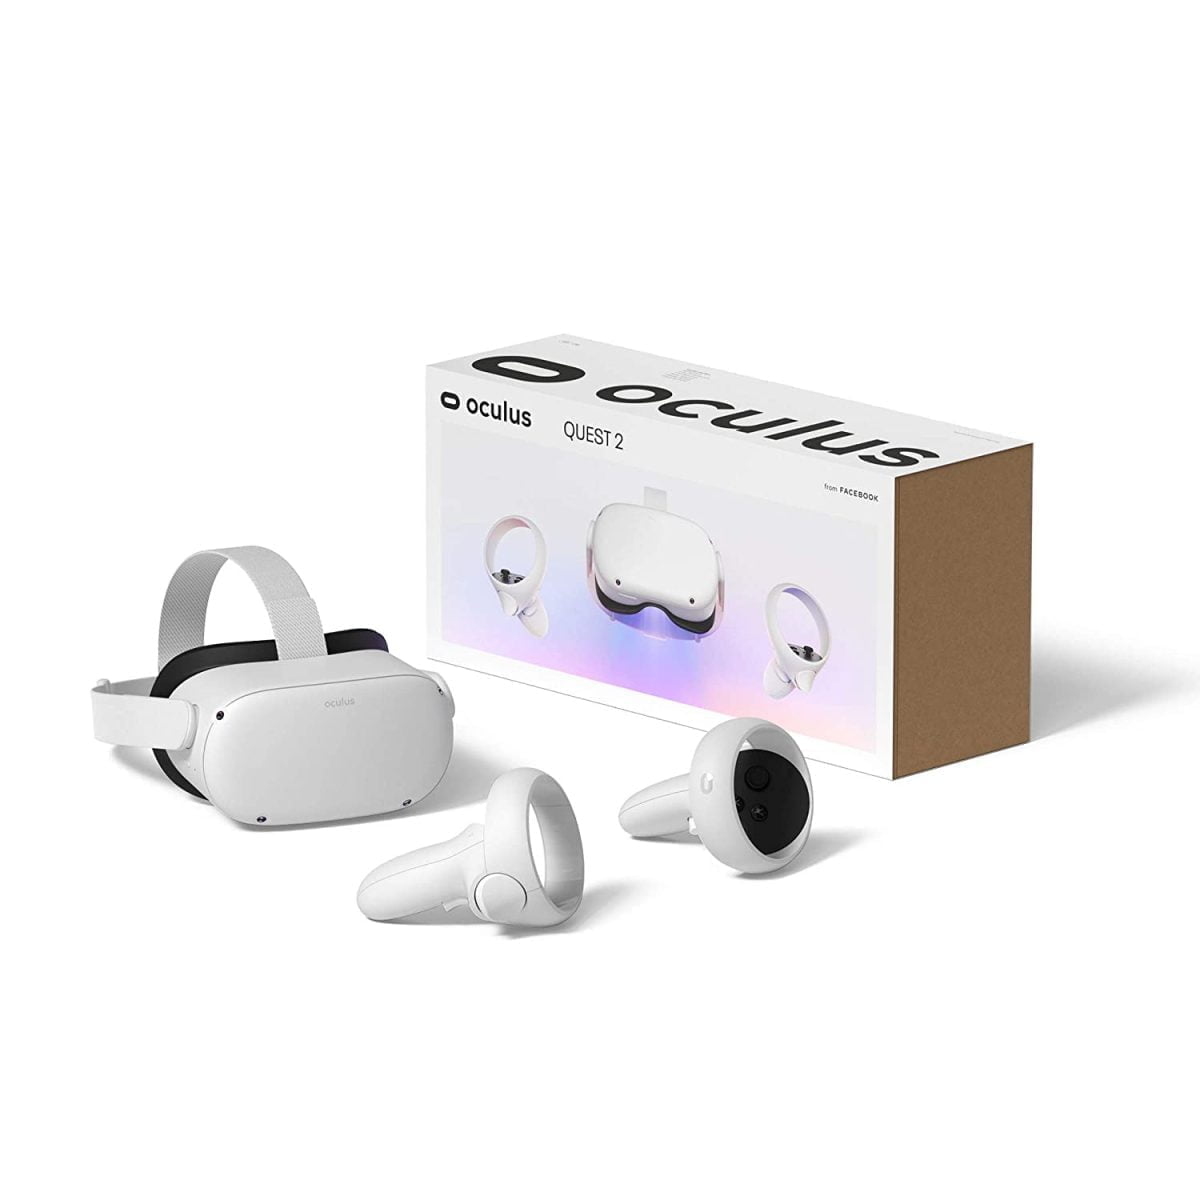 614Rzogtxl. Sl1500 Oculus &Lt;H1&Gt;&Lt;/H1&Gt; &Lt;H1&Gt;Meta Quest 2 128 Gb Virtual Reality Headset Bundle Of 10 (Combo Offer)&Lt;/H1&Gt; Https://Youtu.be/Atvgl9Wojsm &Lt;Ul Class=&Quot;A-Unordered-List A-Vertical A-Spacing-Mini&Quot;&Gt; &Lt;Li&Gt;&Lt;Span Class=&Quot;A-List-Item&Quot;&Gt;Voltage: 100-240 V&Lt;/Span&Gt;&Lt;/Li&Gt; &Lt;Li&Gt;&Lt;Span Class=&Quot;A-List-Item&Quot;&Gt;Next-Level Hardware - Make Every Move Count With A Blazing-Fast Processor And Our Highest-Resolution Display&Lt;/Span&Gt;&Lt;/Li&Gt; &Lt;Li&Gt;&Lt;Span Class=&Quot;A-List-Item&Quot;&Gt;All-In-One Gaming - With Backward Compatibility, You Can Explore New Titles And Old Favorites In The Expansive Quest Content Library&Lt;/Span&Gt;&Lt;/Li&Gt; &Lt;Li&Gt;&Lt;Span Class=&Quot;A-List-Item&Quot;&Gt;Immersive Entertainment - Get The Best Seat In The House To Live Concerts, Groundbreaking Films, Exclusive Events And More&Lt;/Span&Gt;&Lt;/Li&Gt; &Lt;Li&Gt;&Lt;Span Class=&Quot;A-List-Item&Quot;&Gt;Easy Setup - Just Open The Box, Set Up With The Smartphone App And Jump Into Vr. No Pc Or Console Needed. Requires Wireless Internet Access And The Oculus App (Free Download) To Set Up Device Premium Display - Catch Every Detail With A Stunning Display That Features 50% More Pixels Than The Original Quest Ultimate Control - Redesigned Oculus Touch Controllers Transport Your Movements Directly Into Vr With Intuitive Controls Pc Vr Compatible - Step Into Incredible Oculus Rift Titles By Connecting An Oculus Link Cable To A Compatible Gaming Pc. Oculus Link Cable Sold Separately 3D Cinematic Sound - Hear In All Directions With Built-In Speakers That Deliver Cinematic 3D Positional Audio&Lt;/Span&Gt;&Lt;/Li&Gt; &Lt;/Ul&Gt; &Nbsp; Meta Quest 2 Meta Quest 2 128 Gb Virtual Reality Headset Bundle Of 10 (Combo Offer)